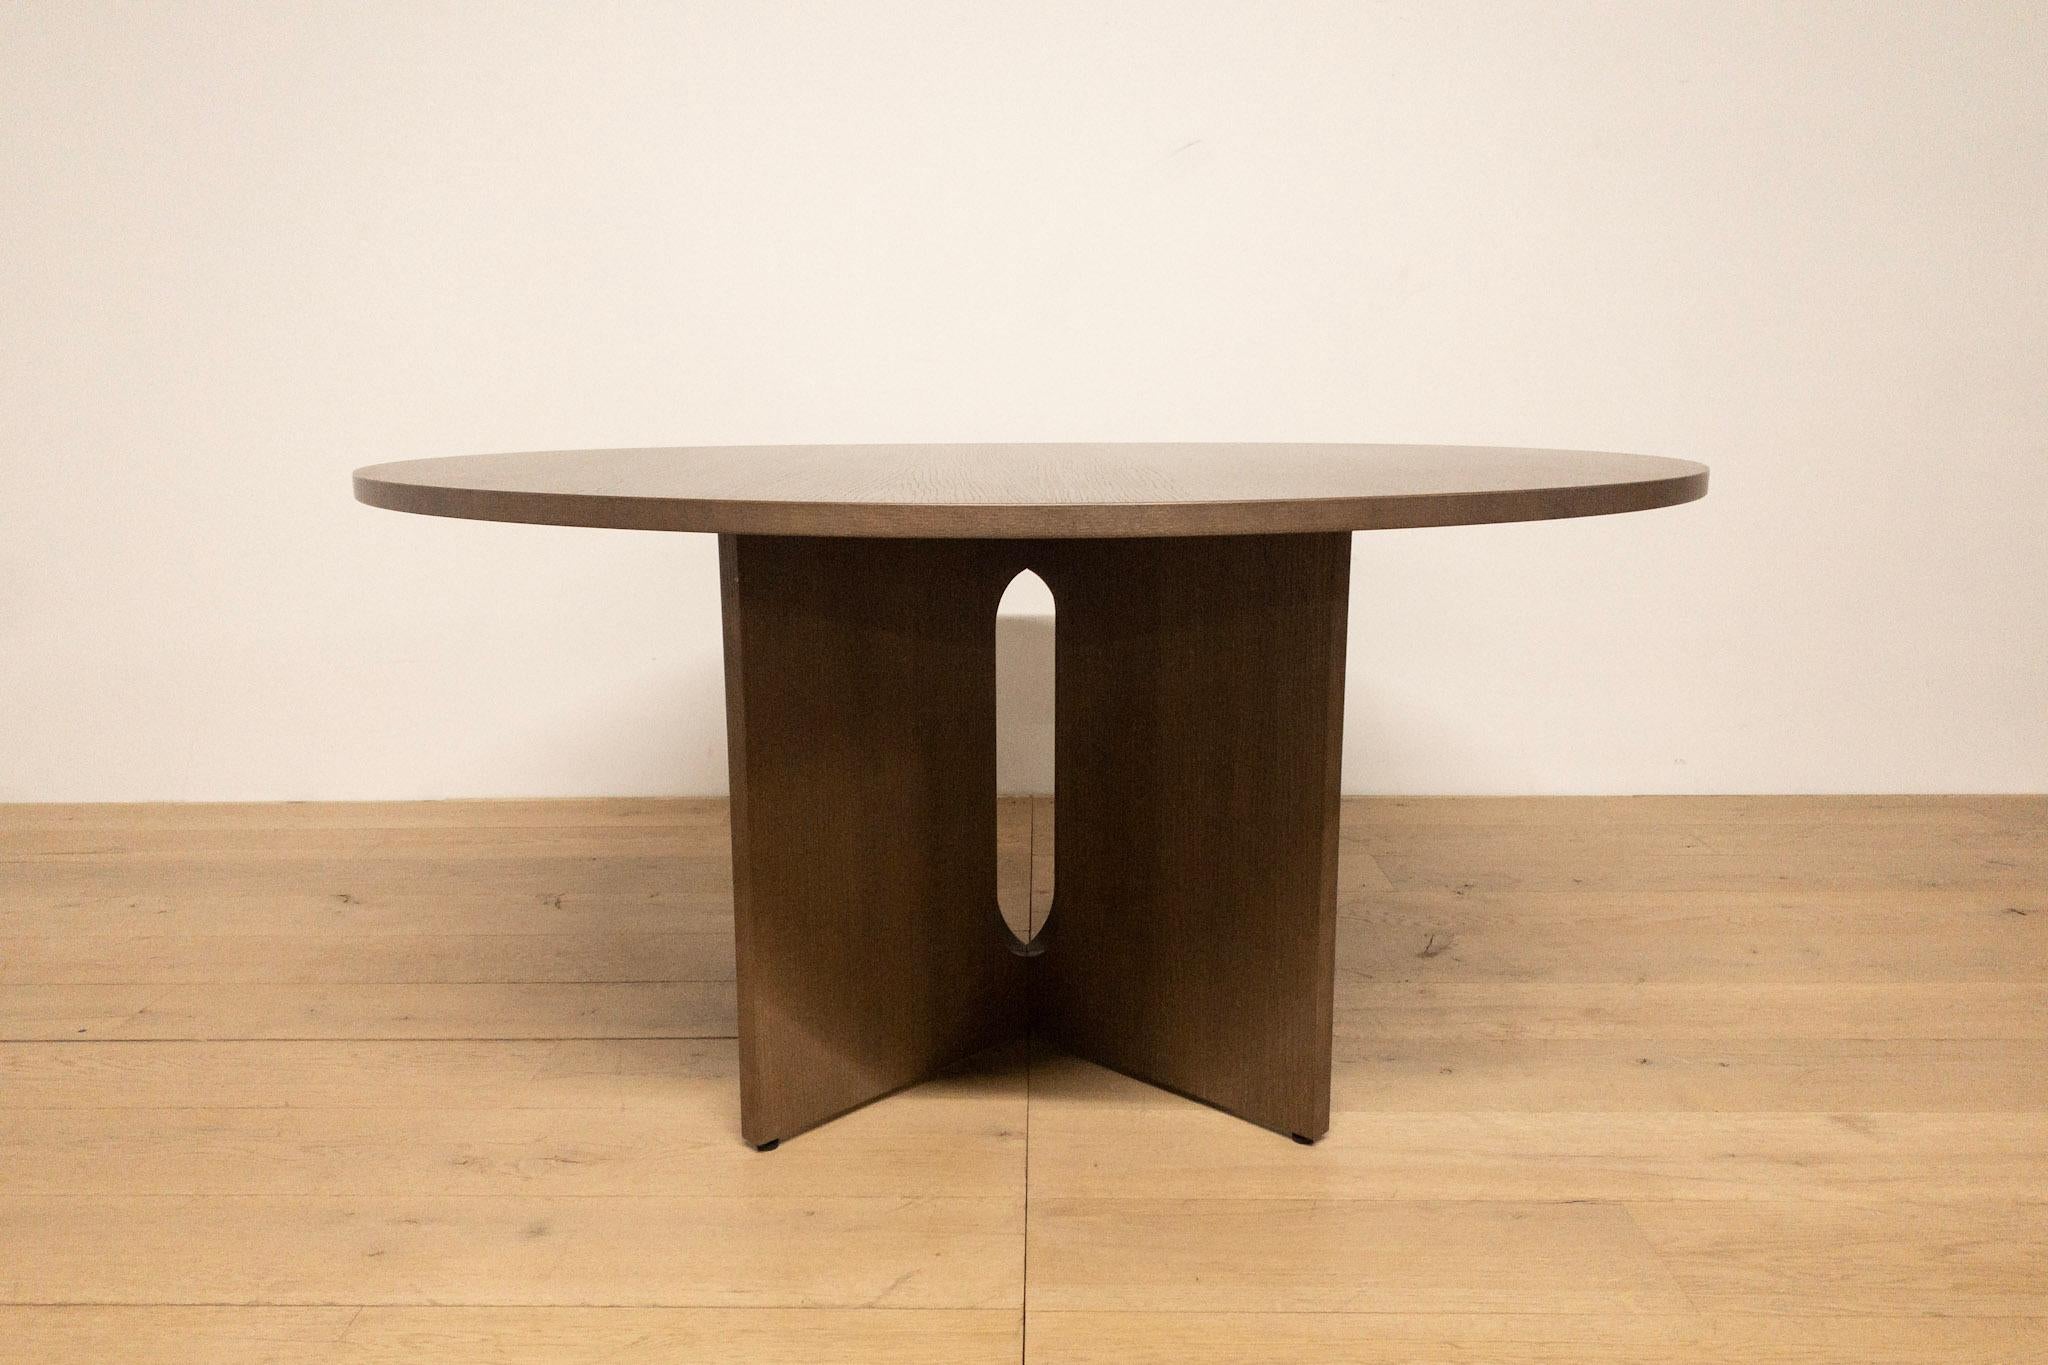 This round dining table is distinguished by its Scandinavian design and elegant silhouette using natural materials like oak to comprise the sculptural base. The invention of the Copenhagen-based Norwegian architect and designer Danielle Siggerud,